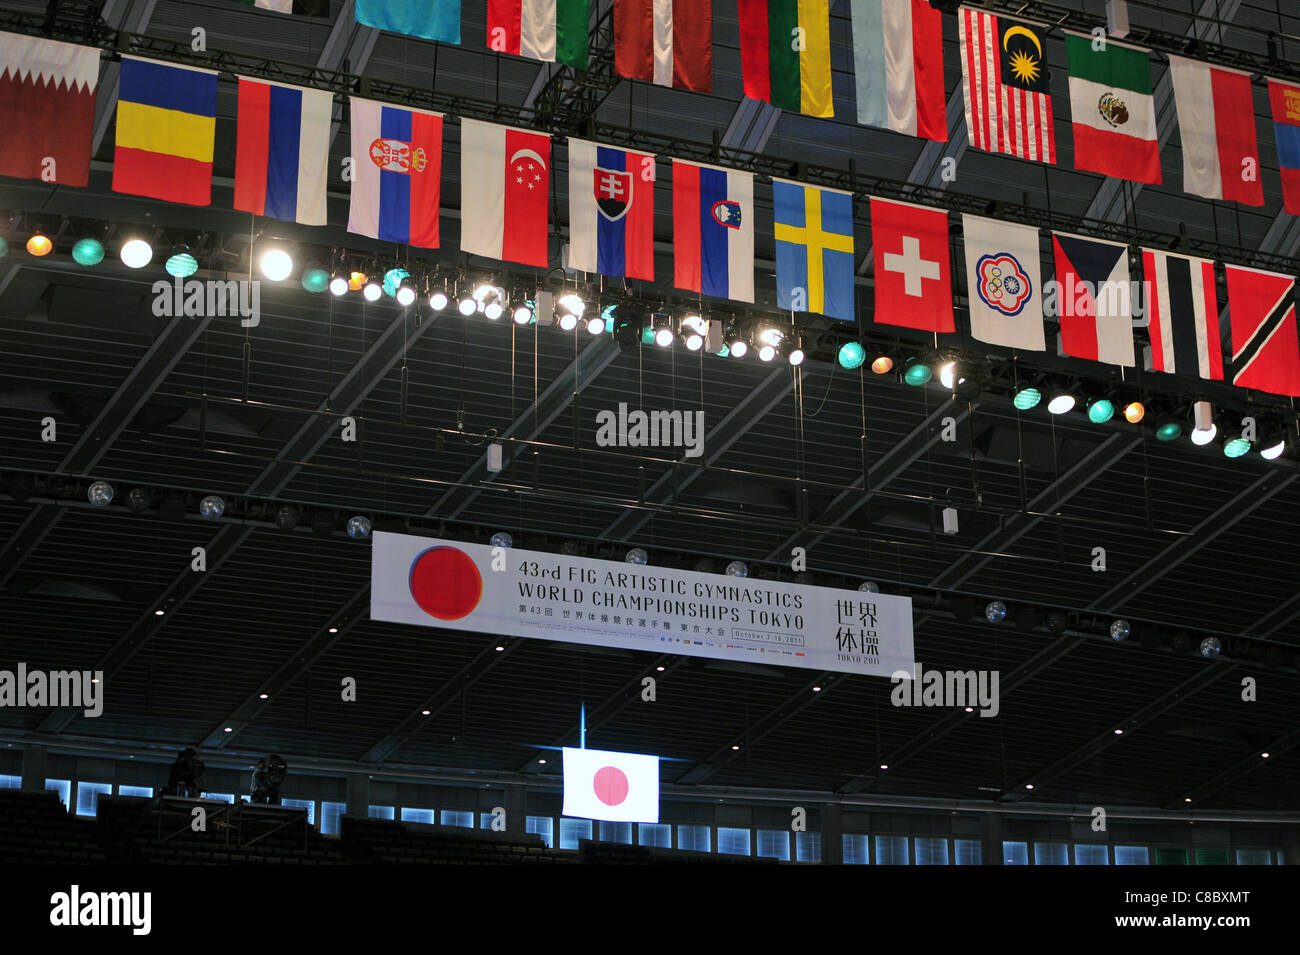 The general view of the Tokyo Metropolitan Gymnasium during the FIG World Artistic Gymnastics Championships Tokyo 2011. Stock Photo